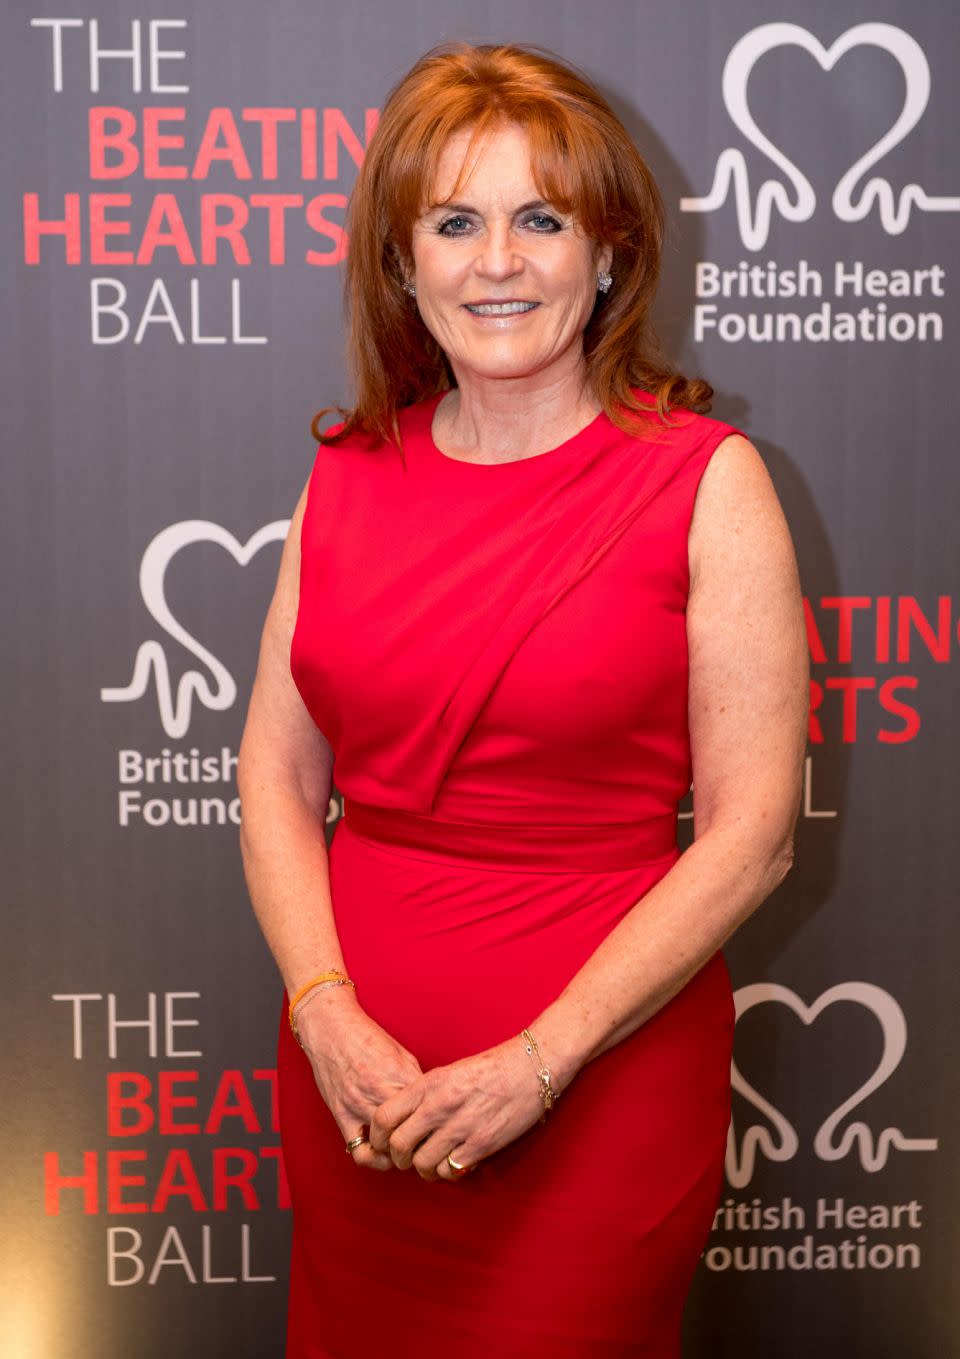 Sarah Ferguson's divorce and her relationship with other men saw her plagued by scandal. Photo: Getty